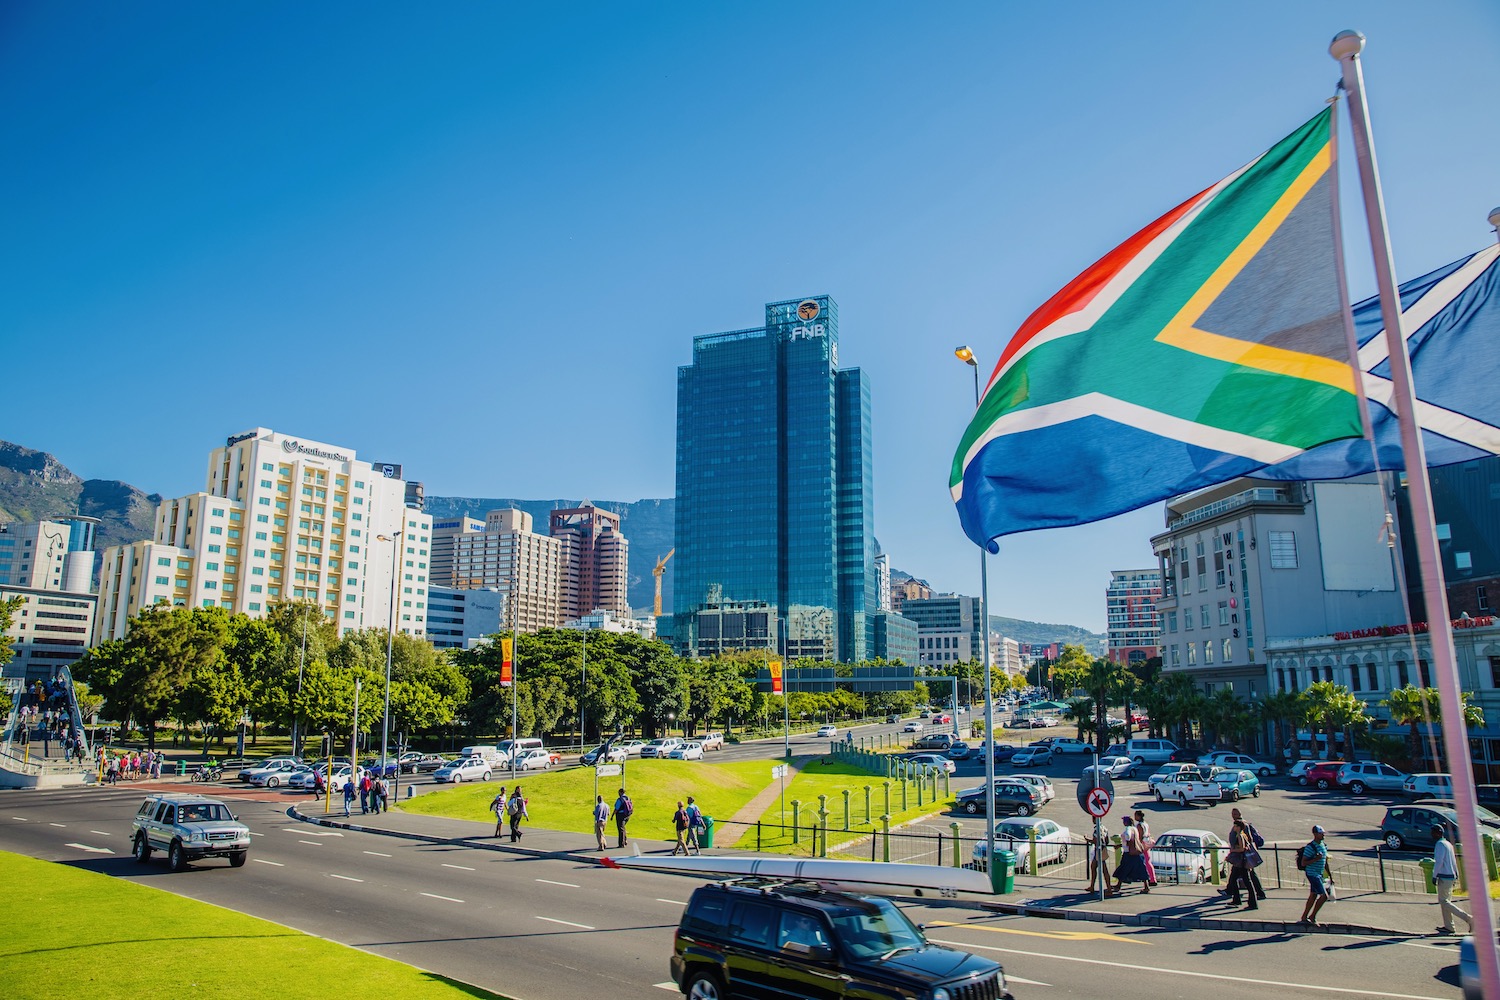 SA’s tech startup ecosystem is slowing down: Can a Startup Act resurrect it?